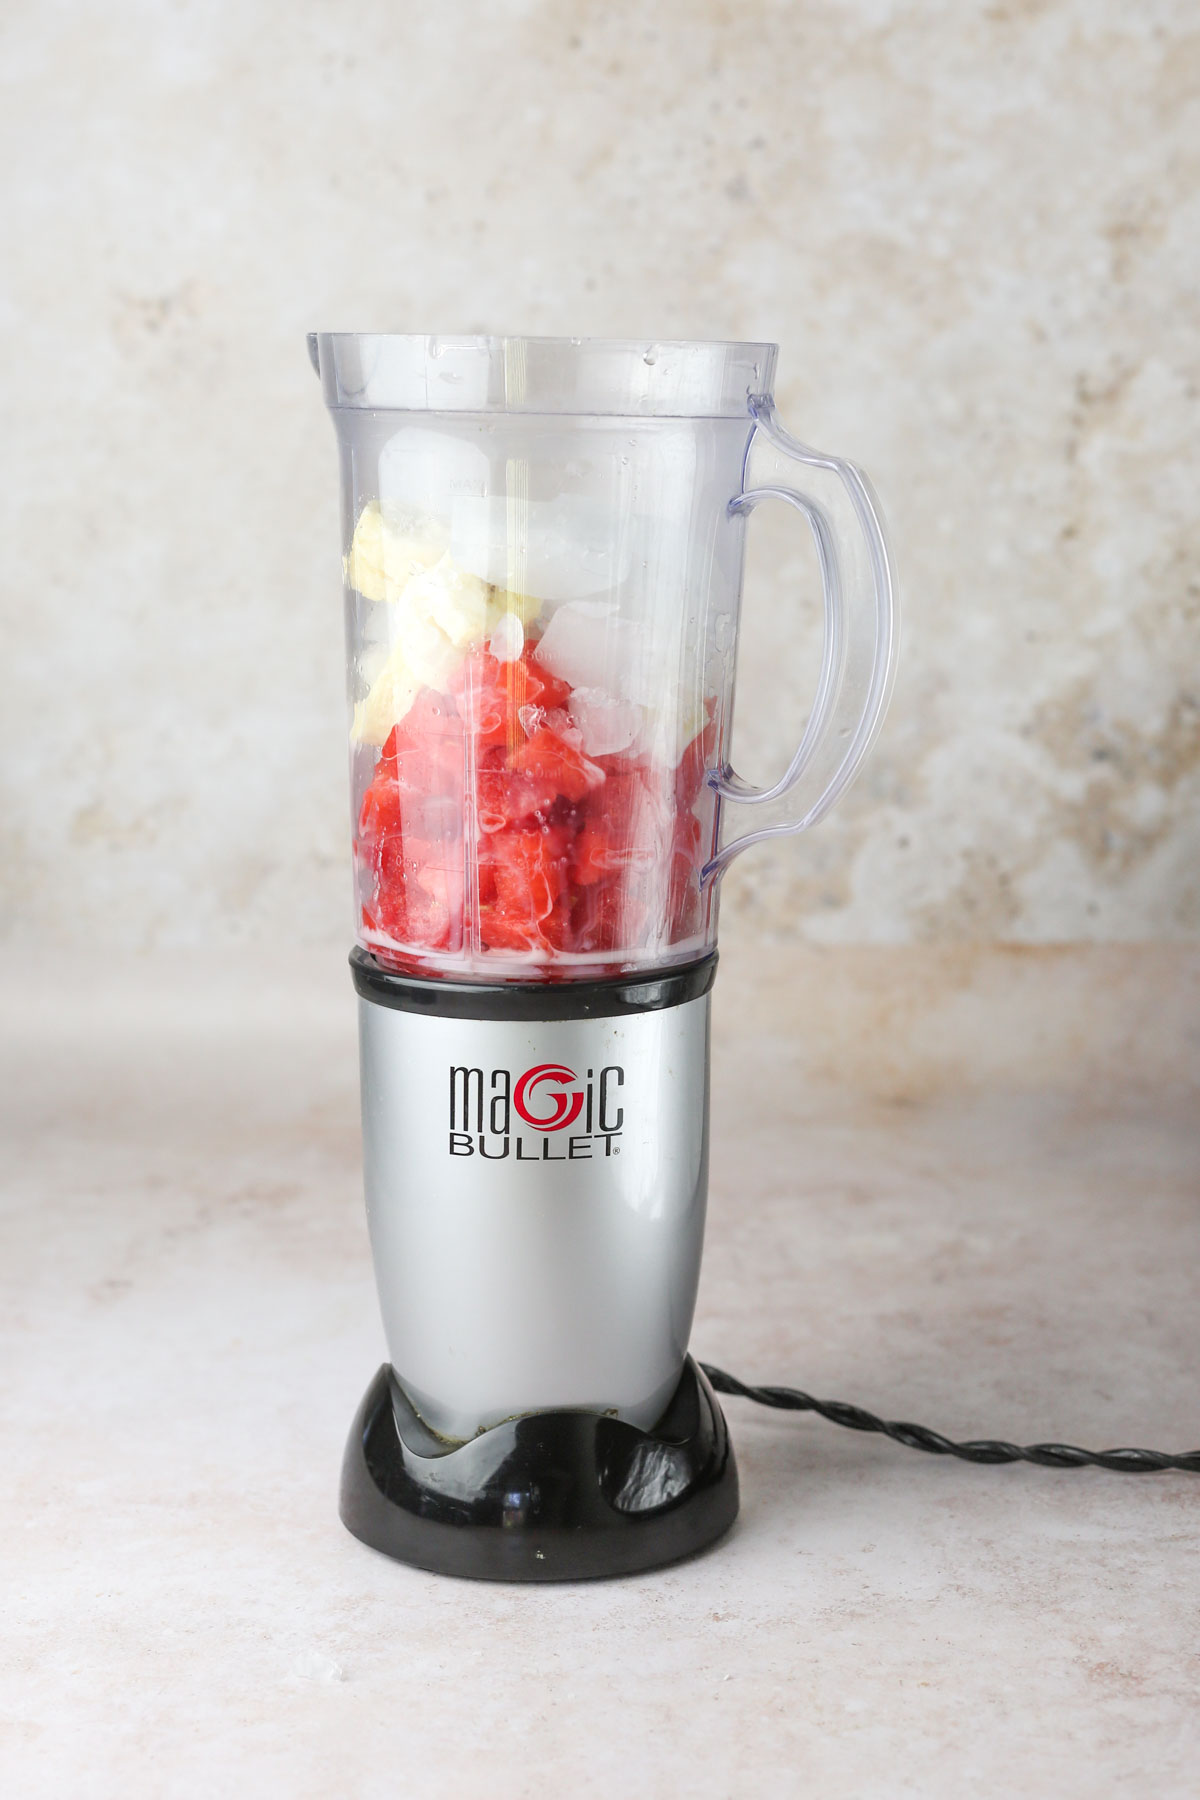 adding the watermelon, banana, and ice to a blender.